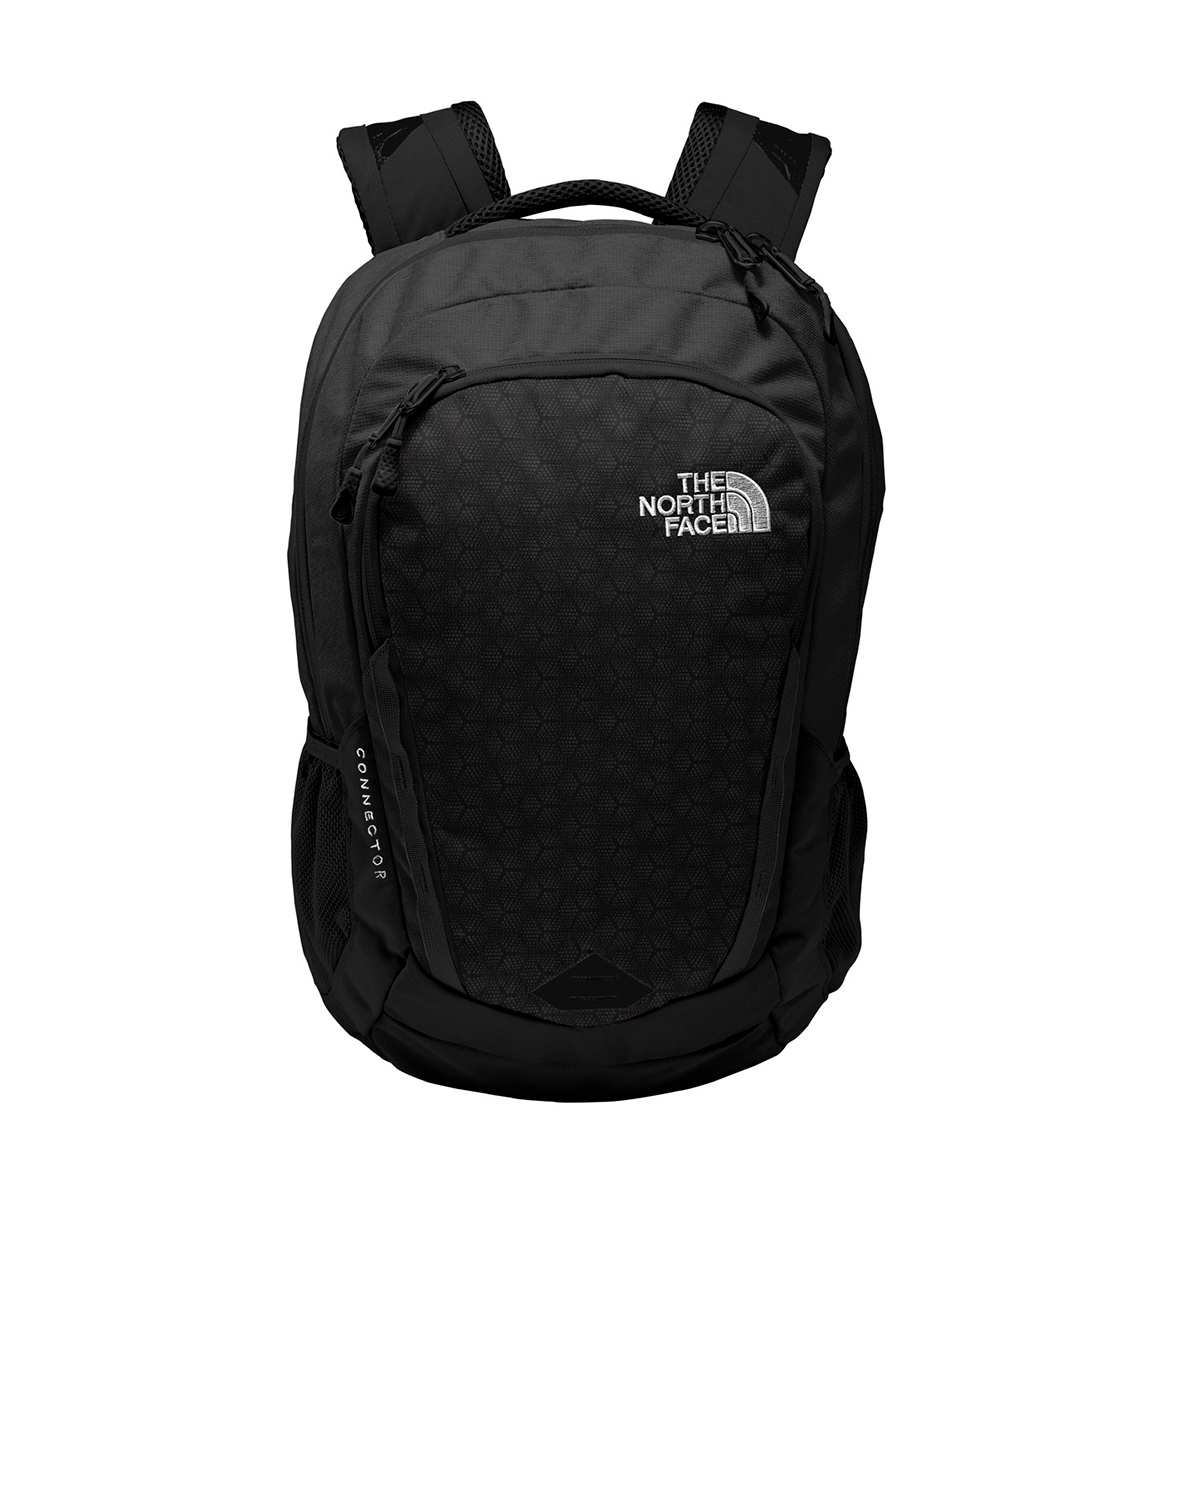 'The North Face NF0A3KX8 Connector Backpack'